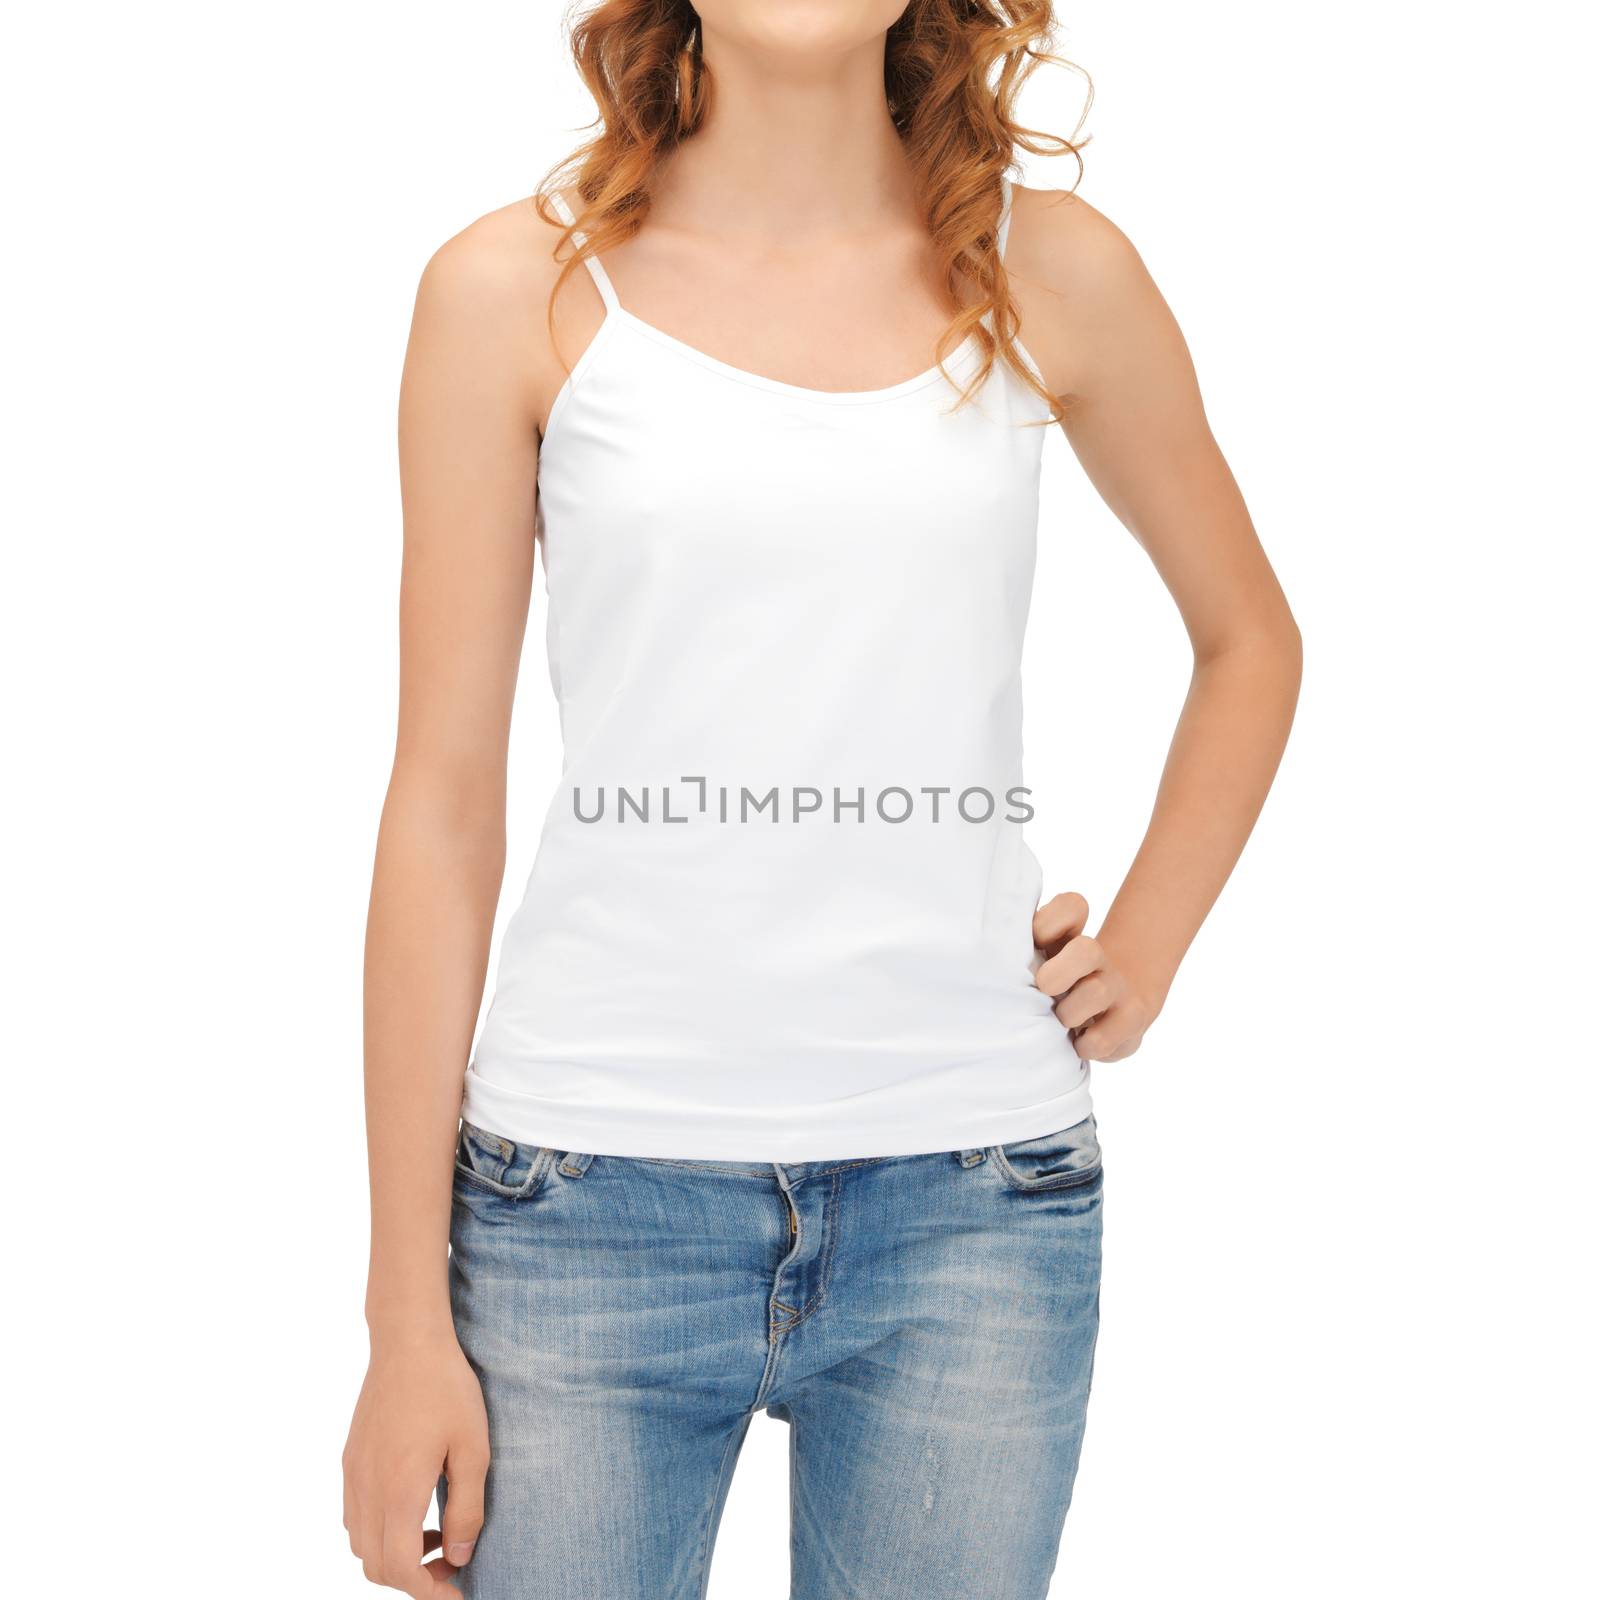 t-shirt design concept - woman in blank white tank top